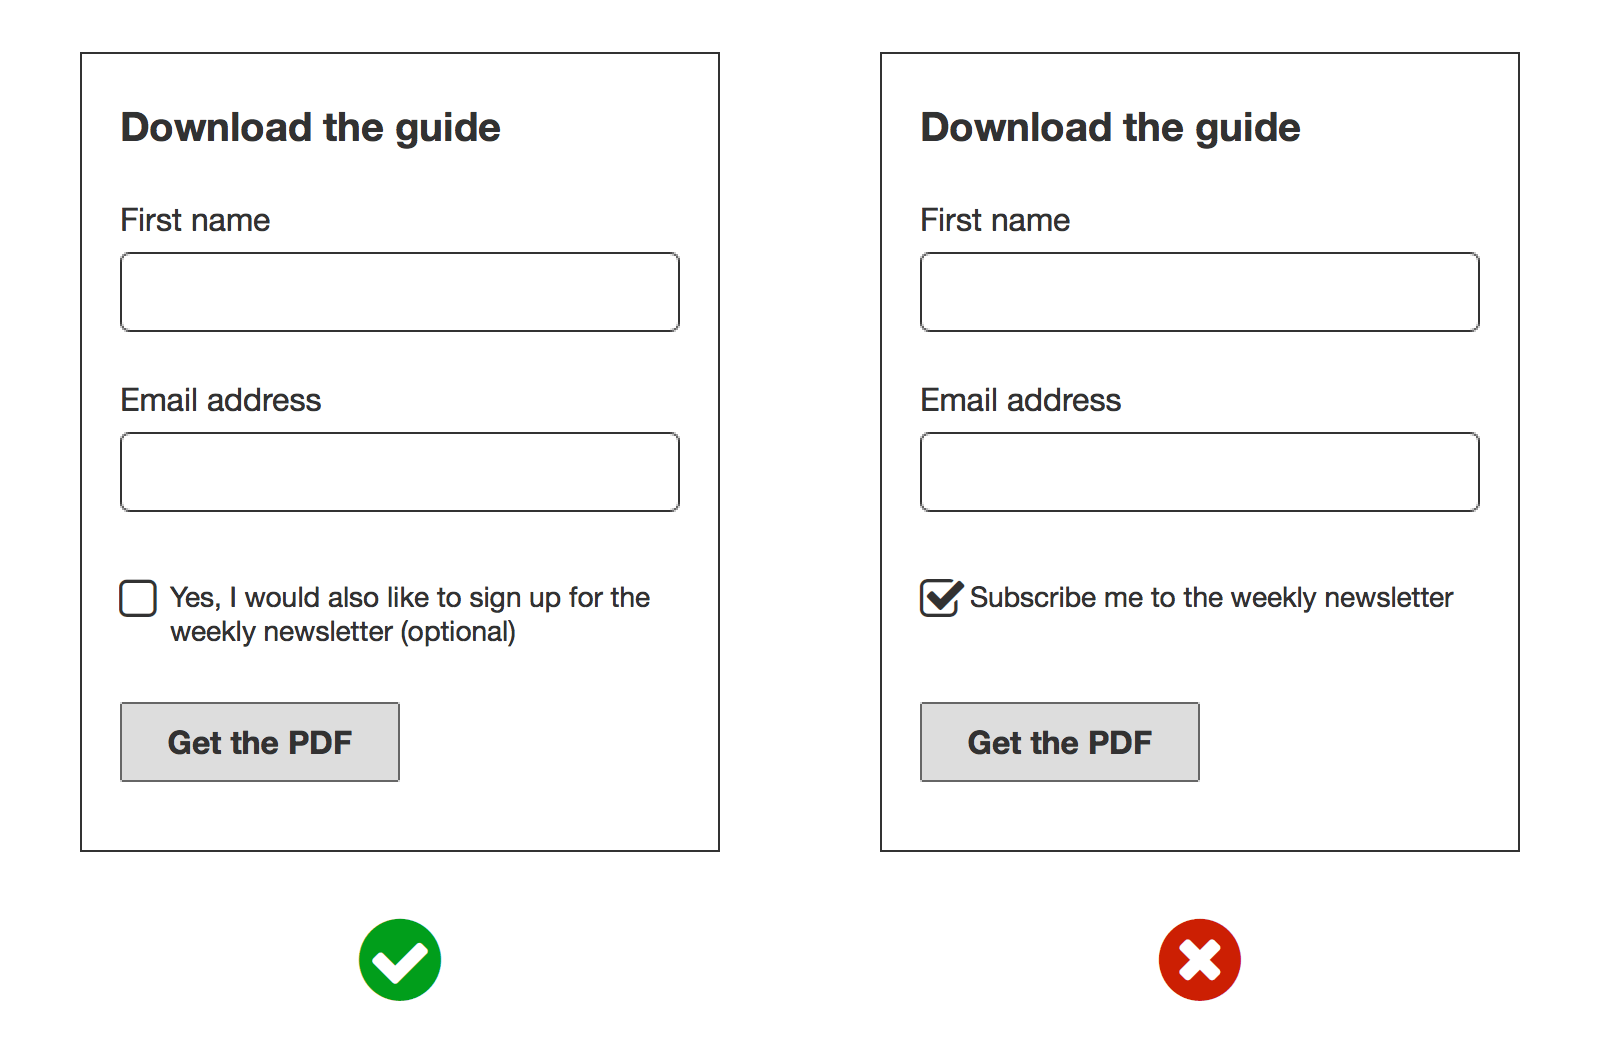 GDPR form - Avoid pre-ticked checkboxes